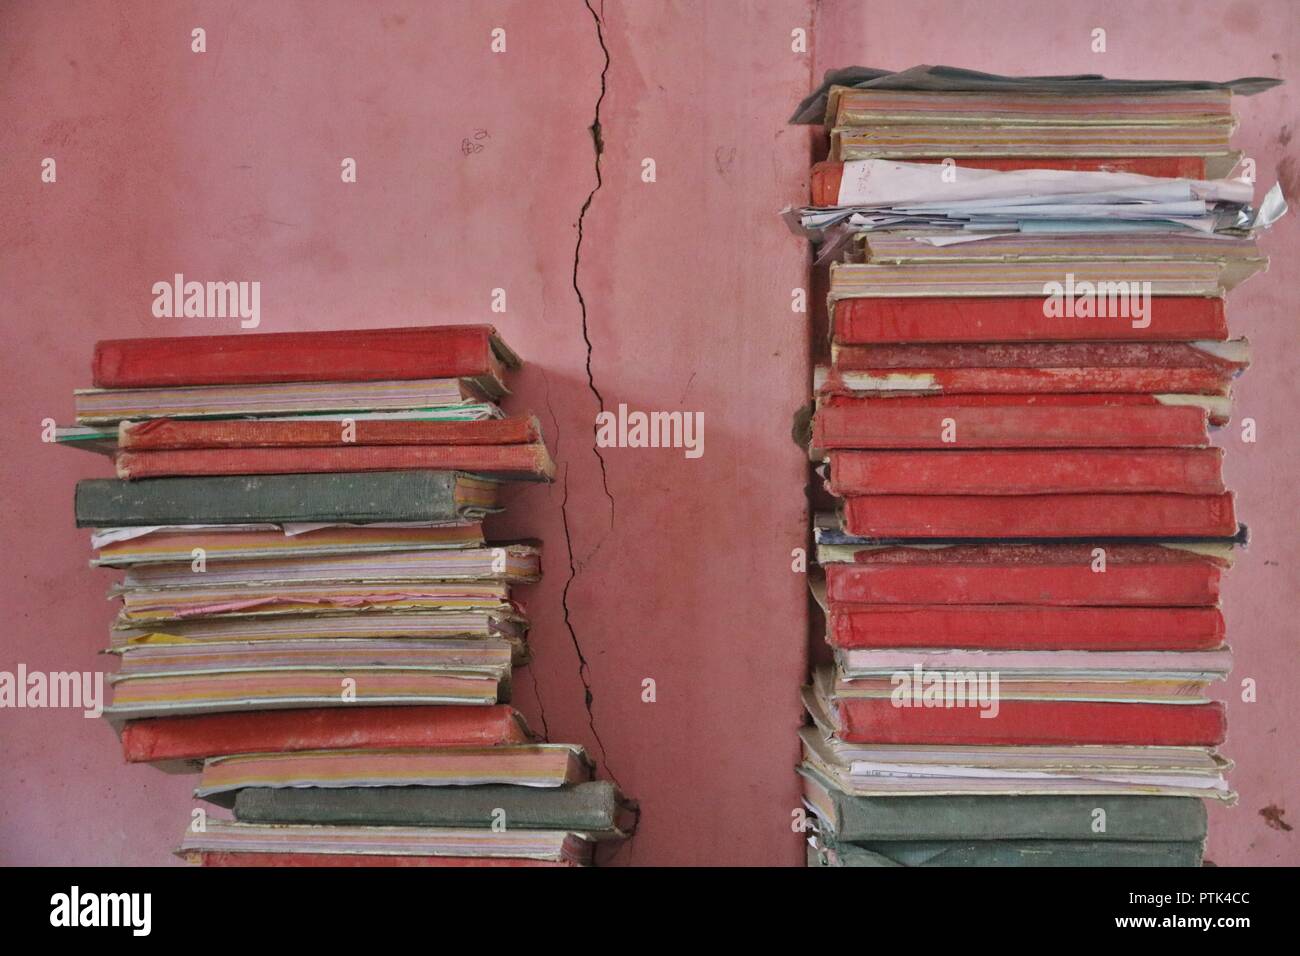 Books in a school in India. Used books. Stock Photo